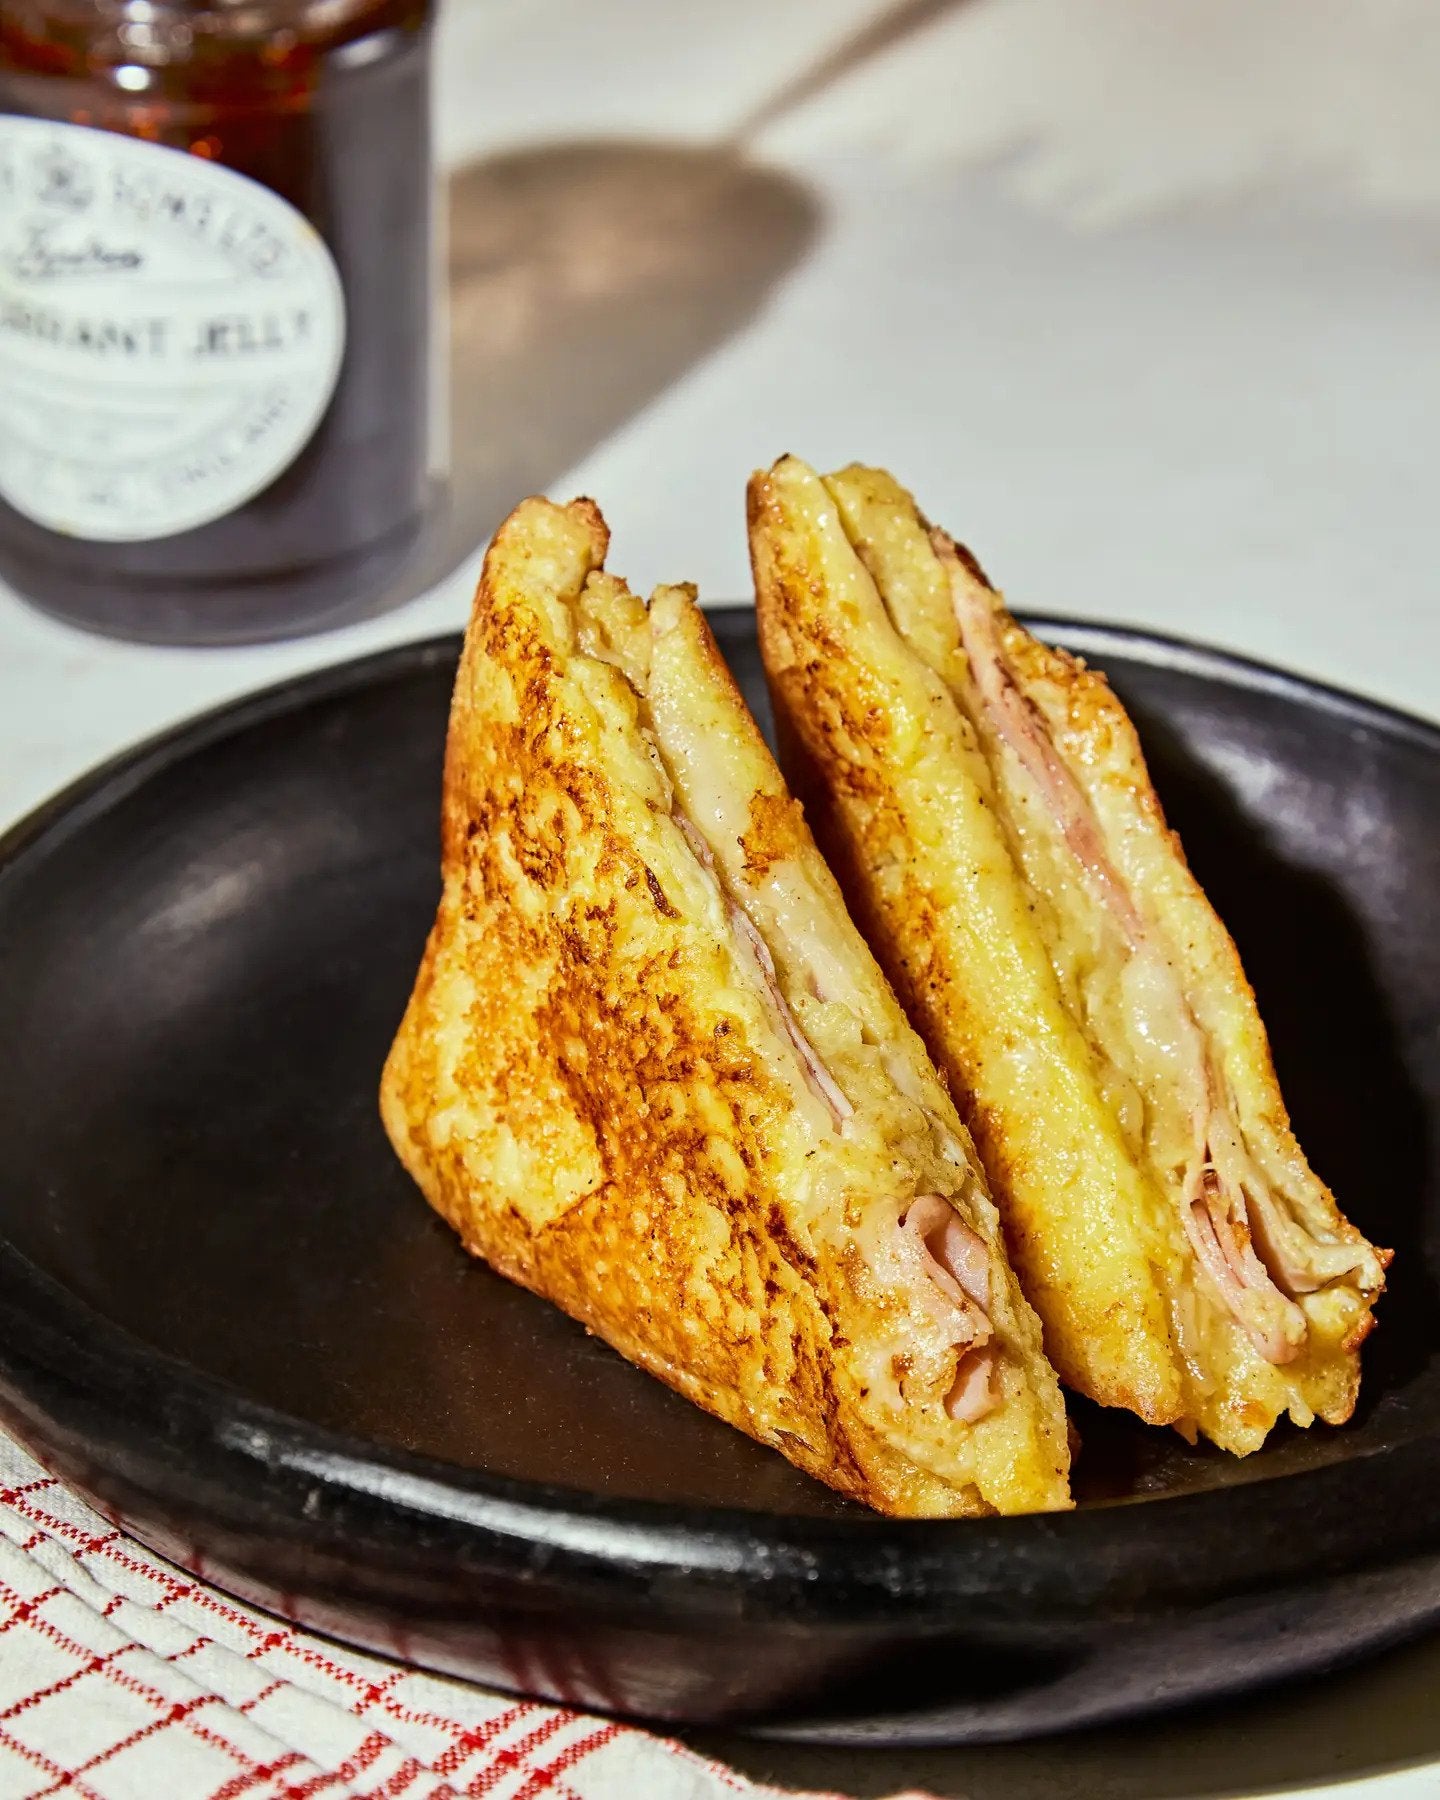 Grilled Cheese Recipes From Around the World